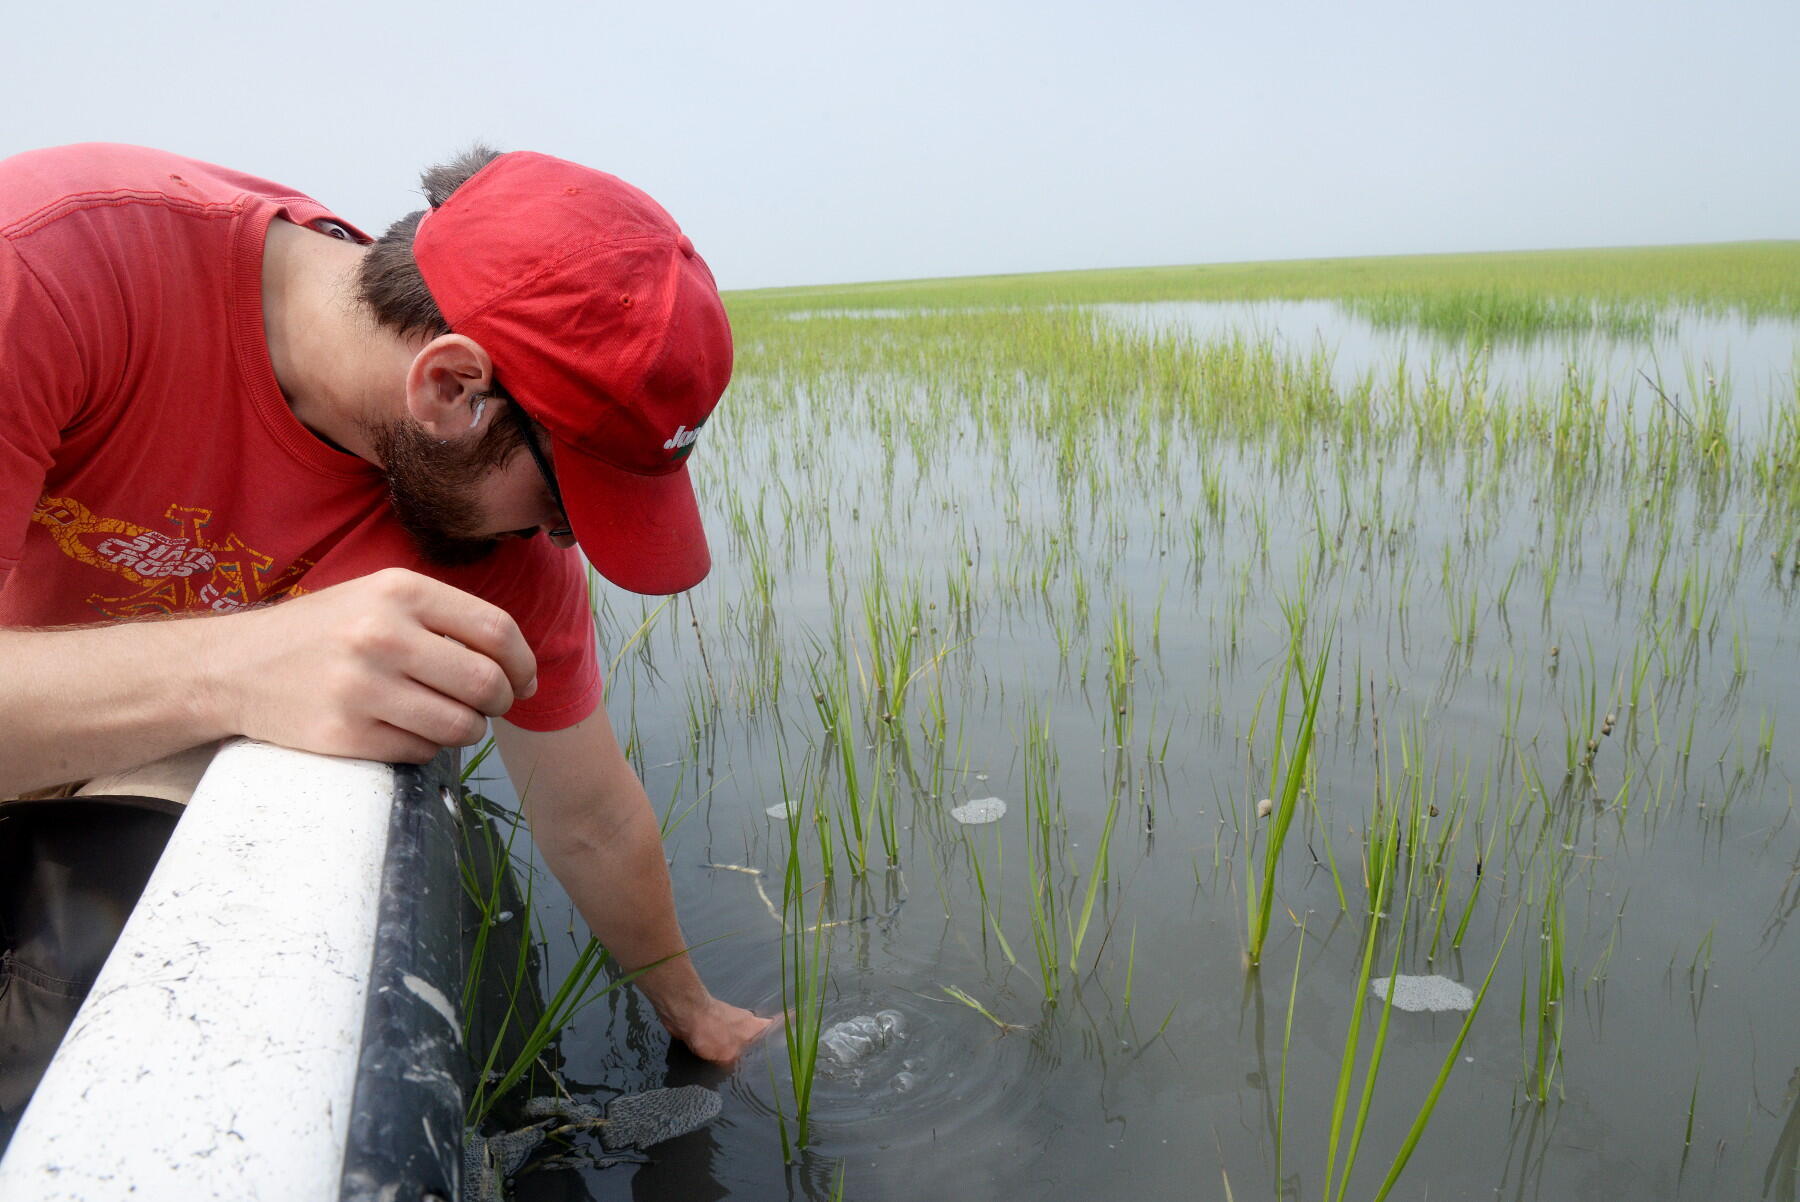 Michael Sinclair, a master's degree student in the Department of Biology, takes a water sample off the shore of Hog Island. (Photo by Brian McNeill, University Relations)